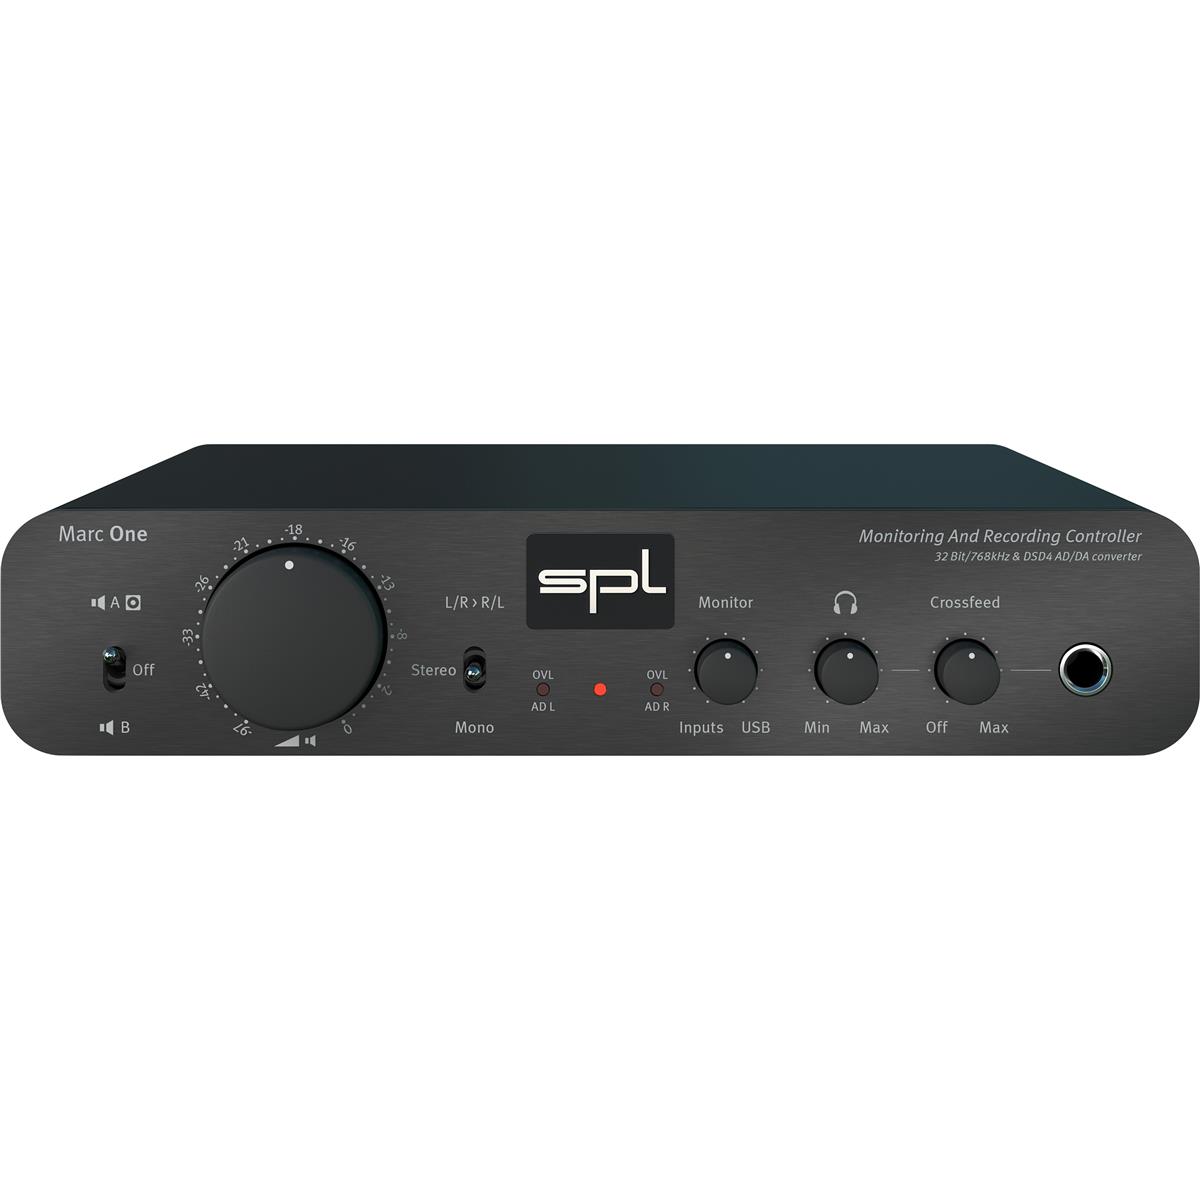 Image of SPL Marc One - The Monitor And Recording Controller with 32-Bit AD/DA Converter